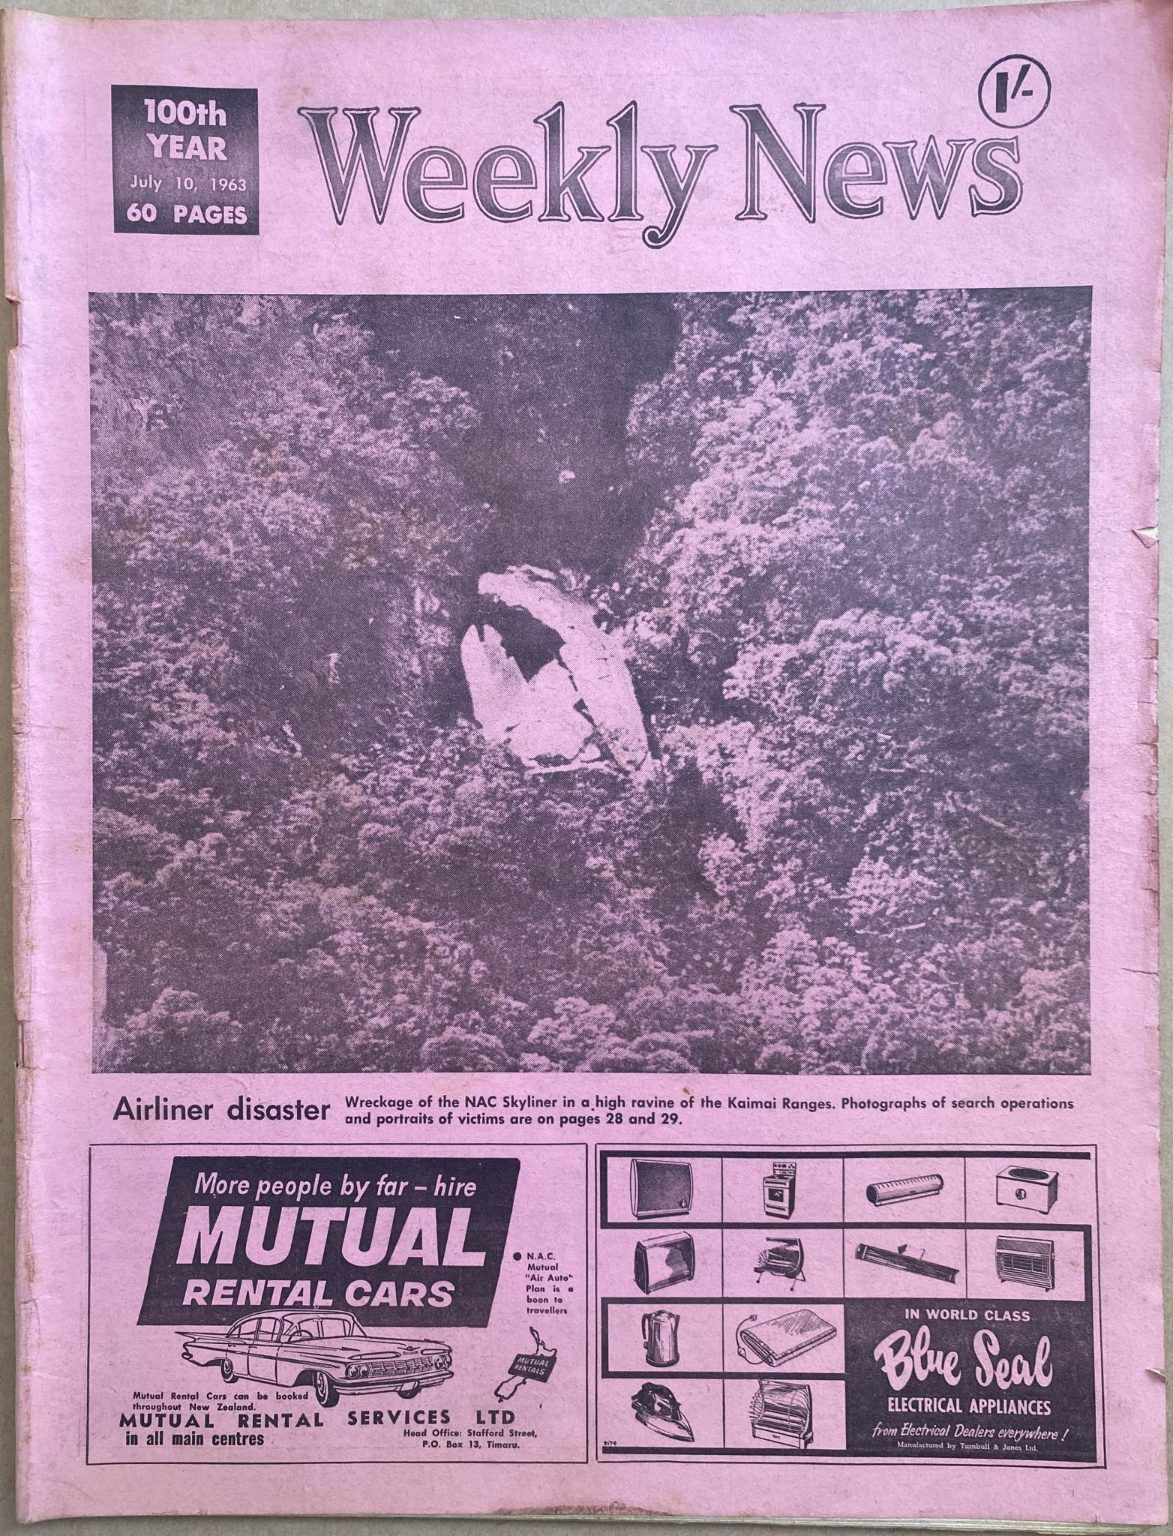 OLD NEWSPAPER: The Weekly News, No. 5198, 10 July 1963